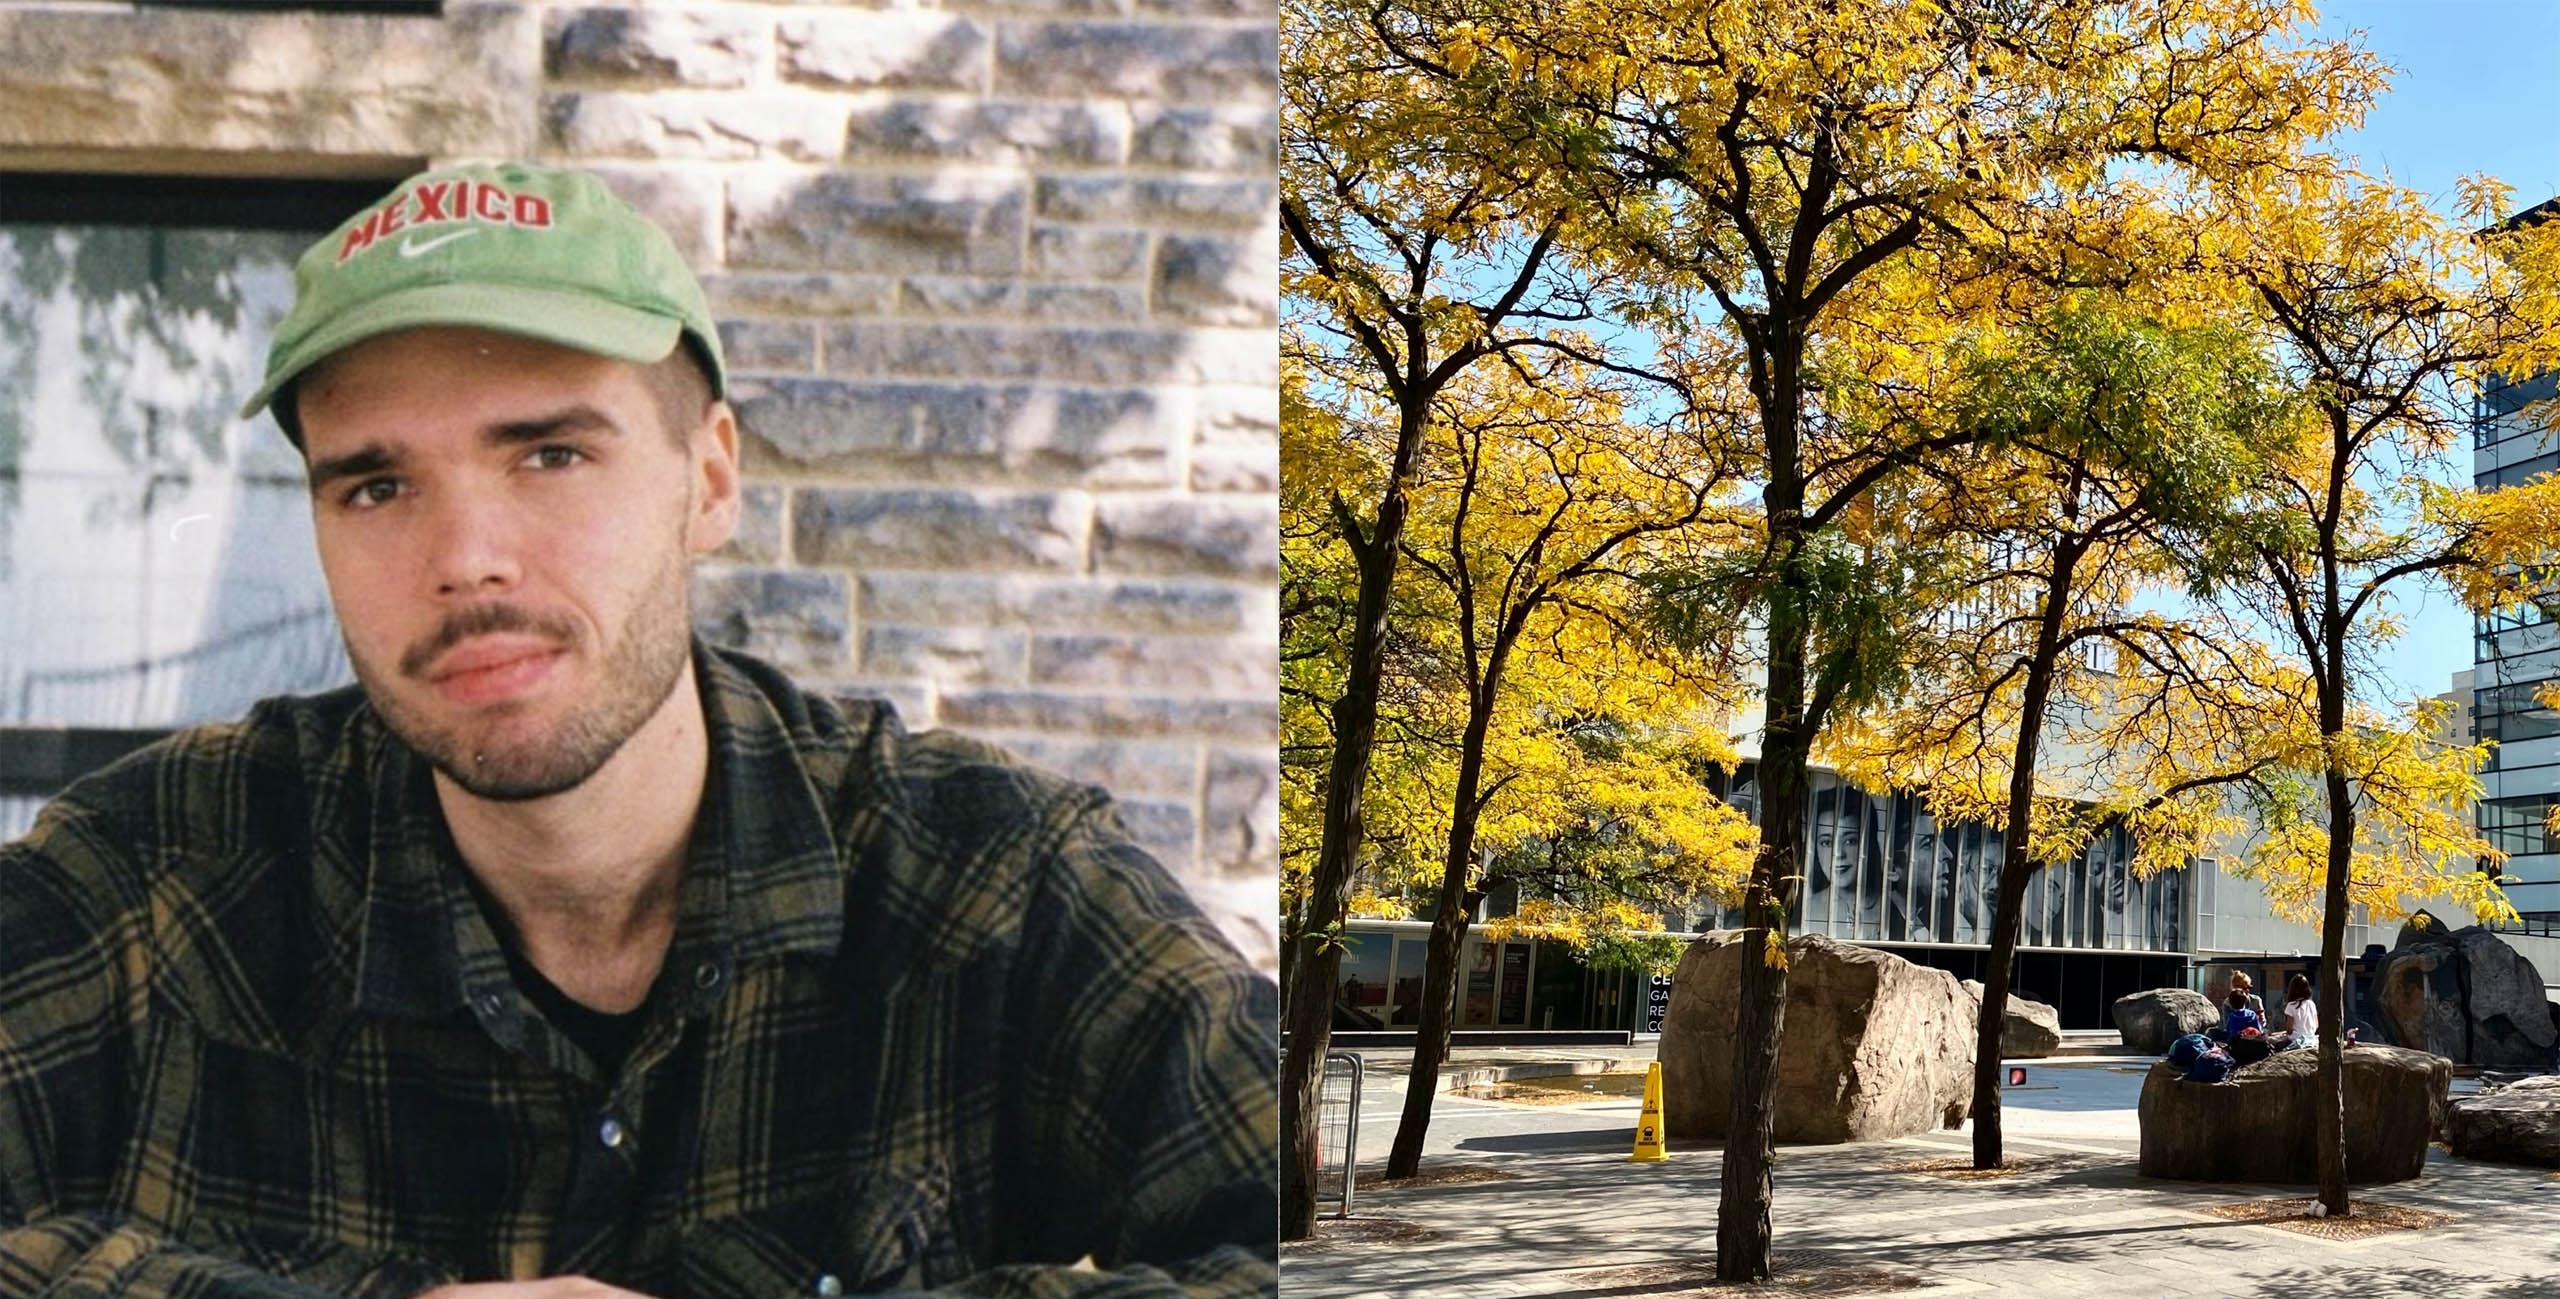 A person wearing a green baseball cap and a green flannel aside trees near the Lake Devo area.